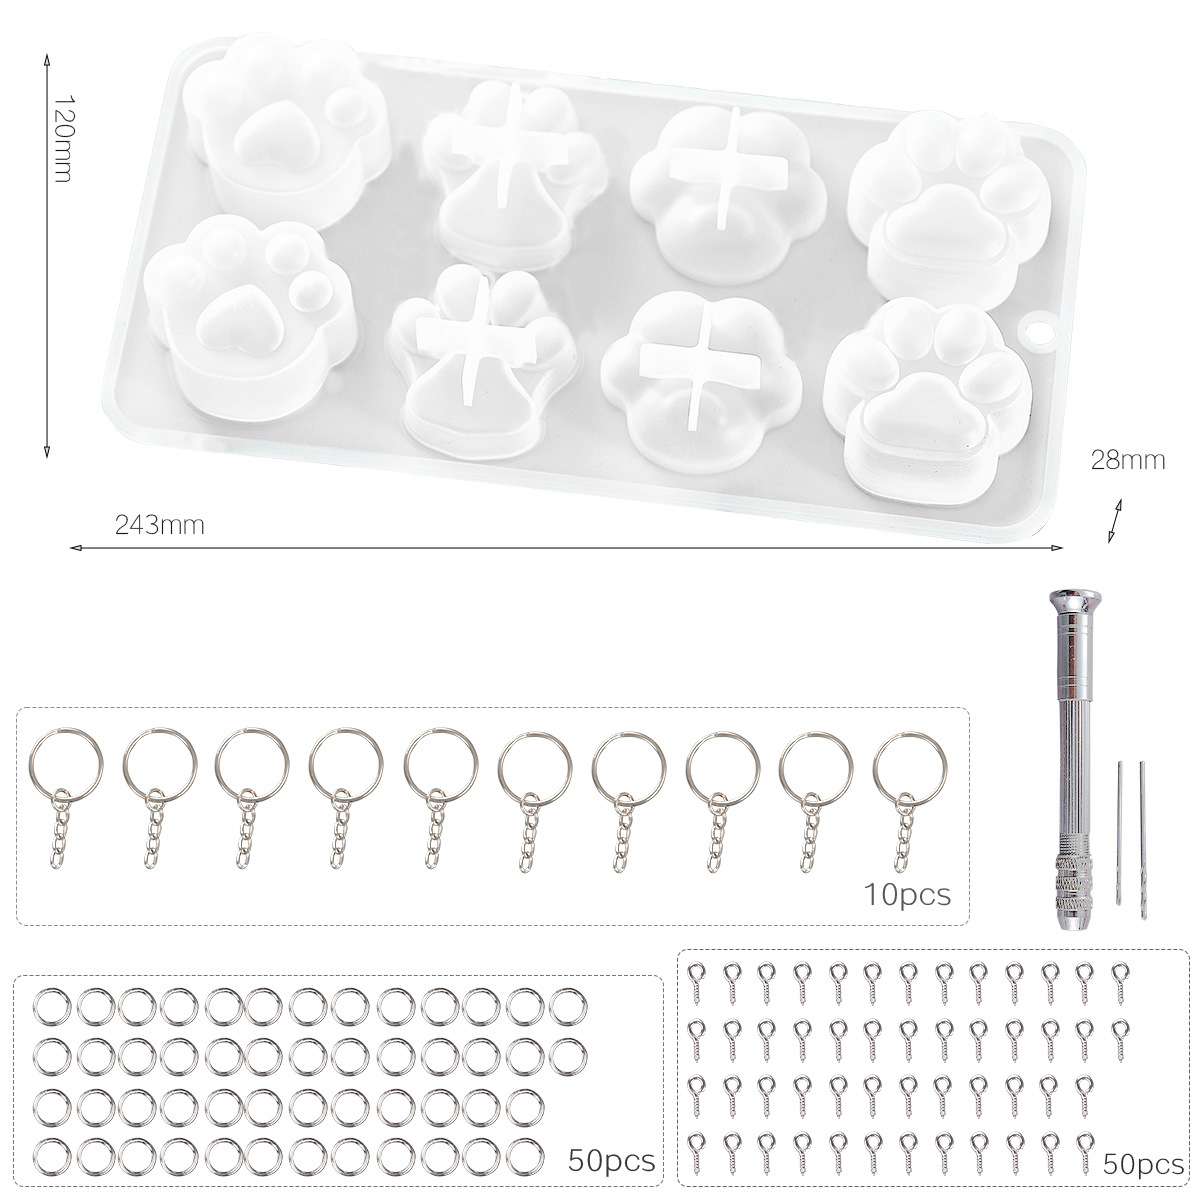 Claw key chain material package (114-piece set)